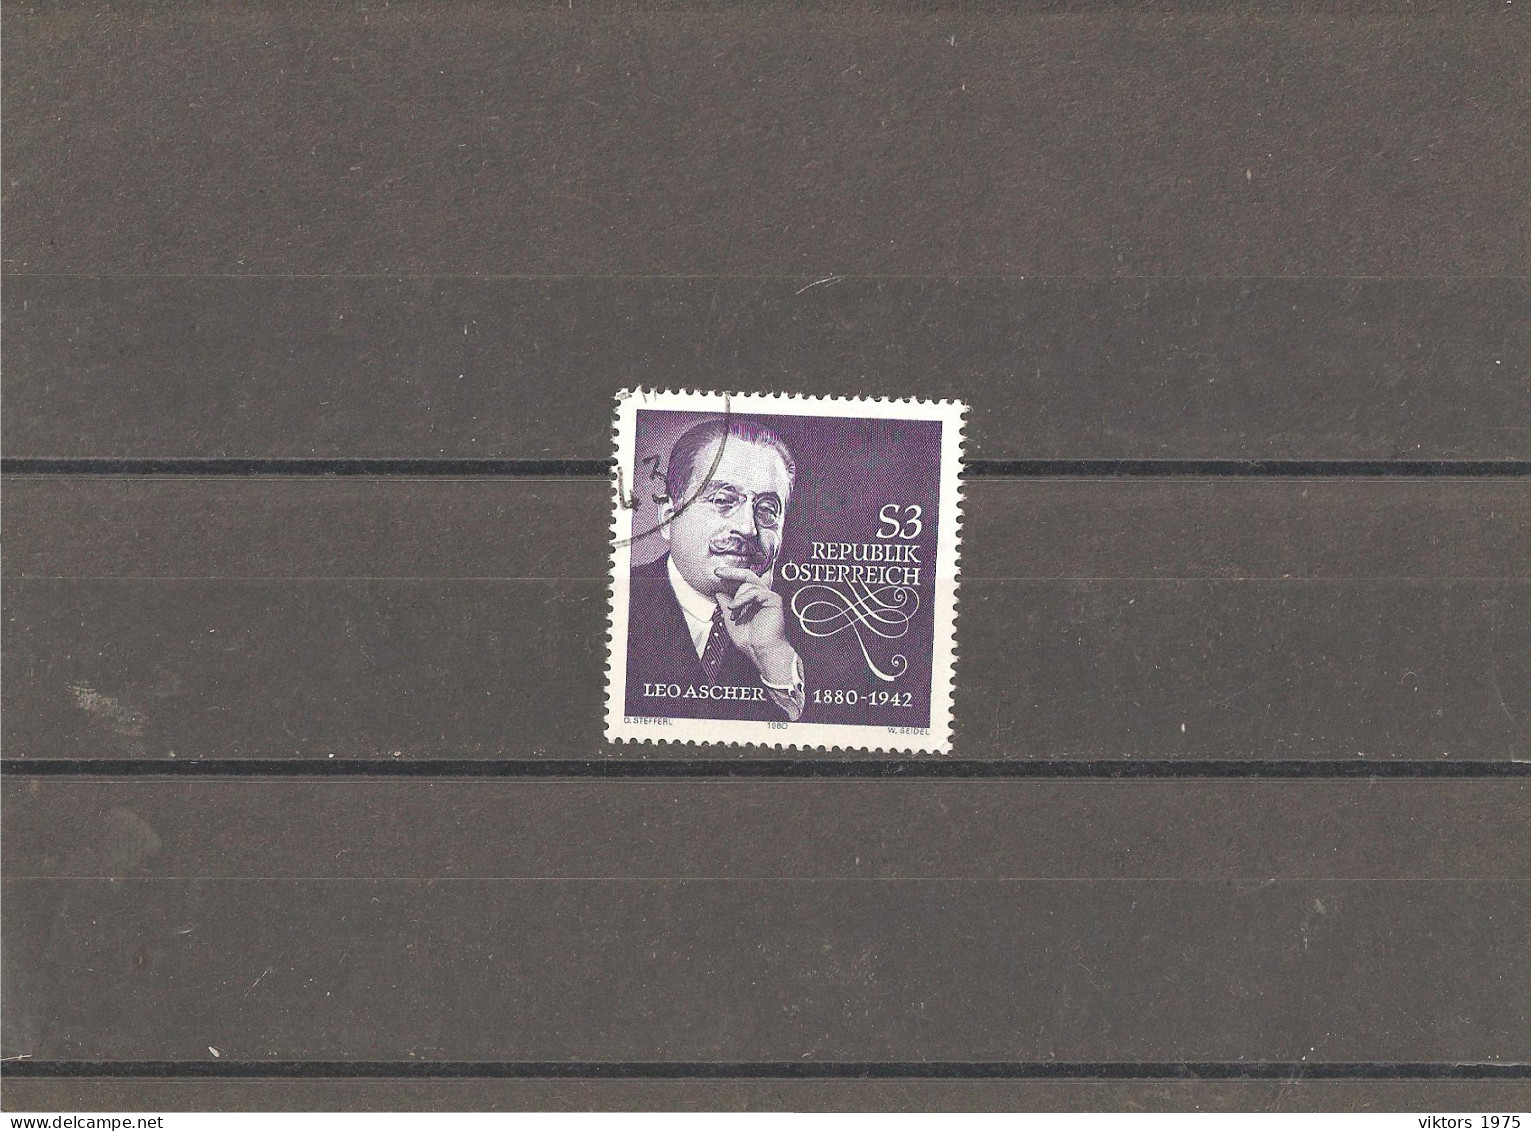 Used Stamp Nr.1650 In MICHEL Catalog - Used Stamps